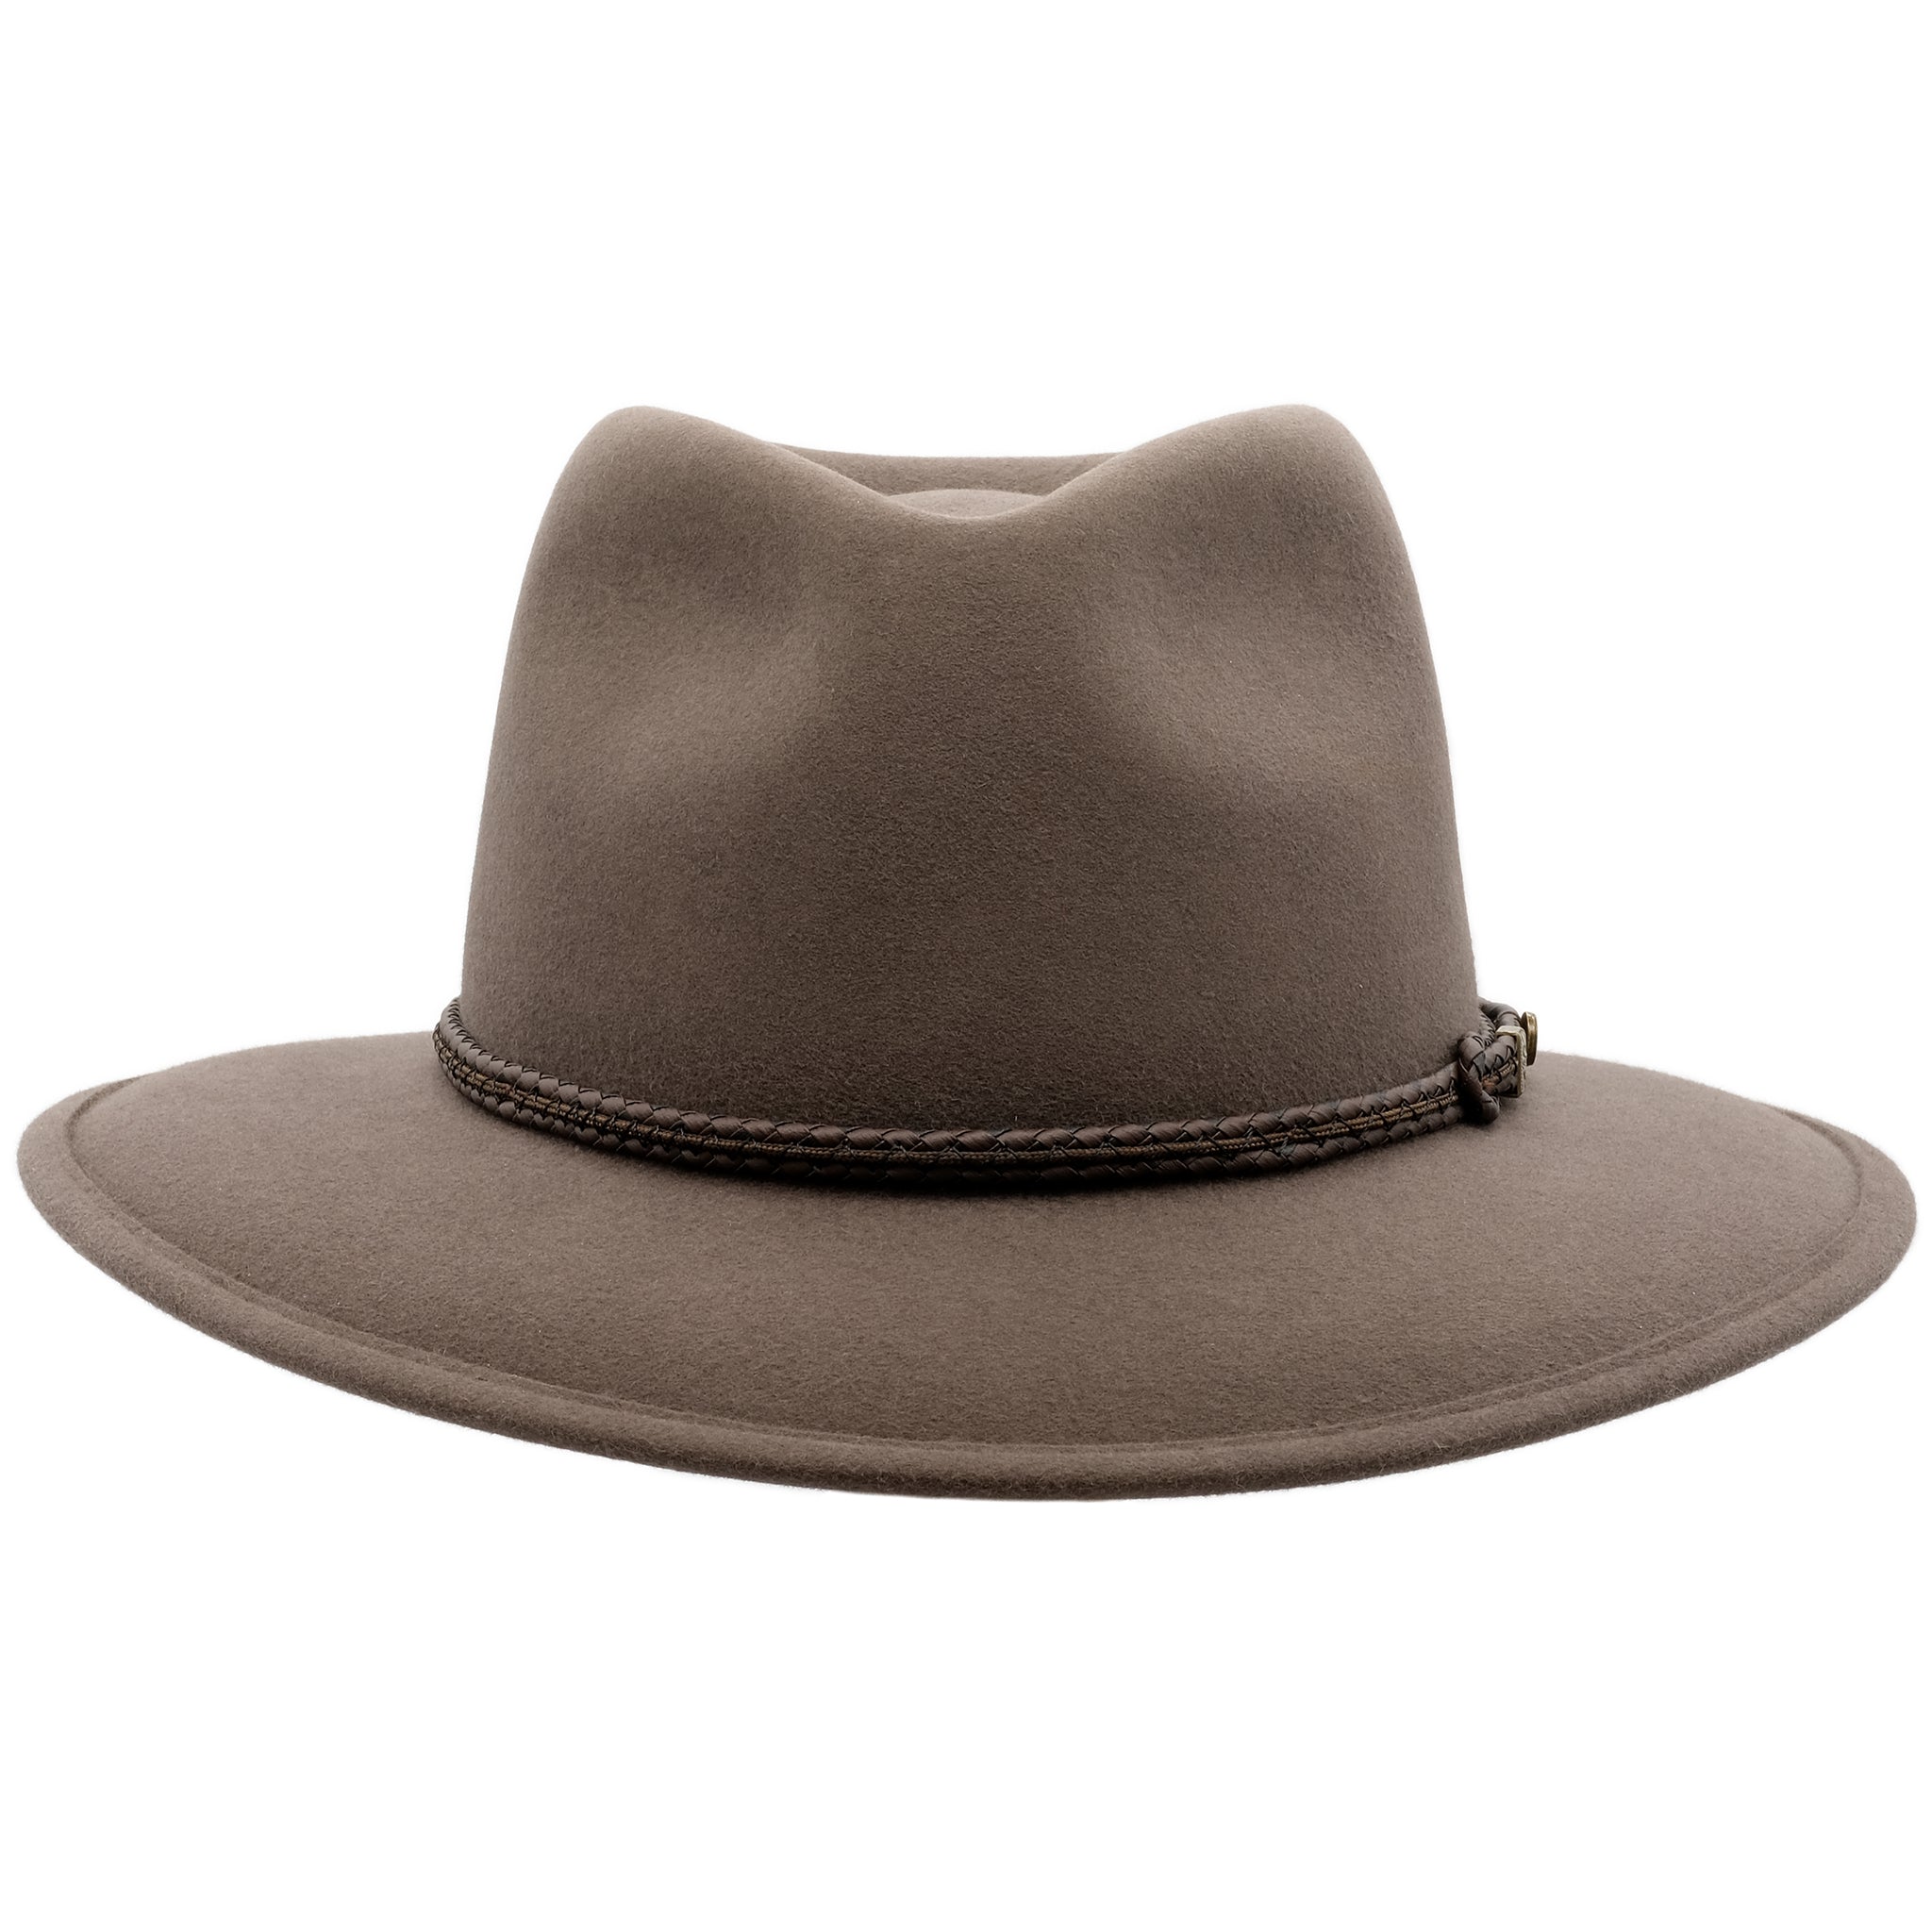 front view of the Akubra Traveller style hat in Regency fawn